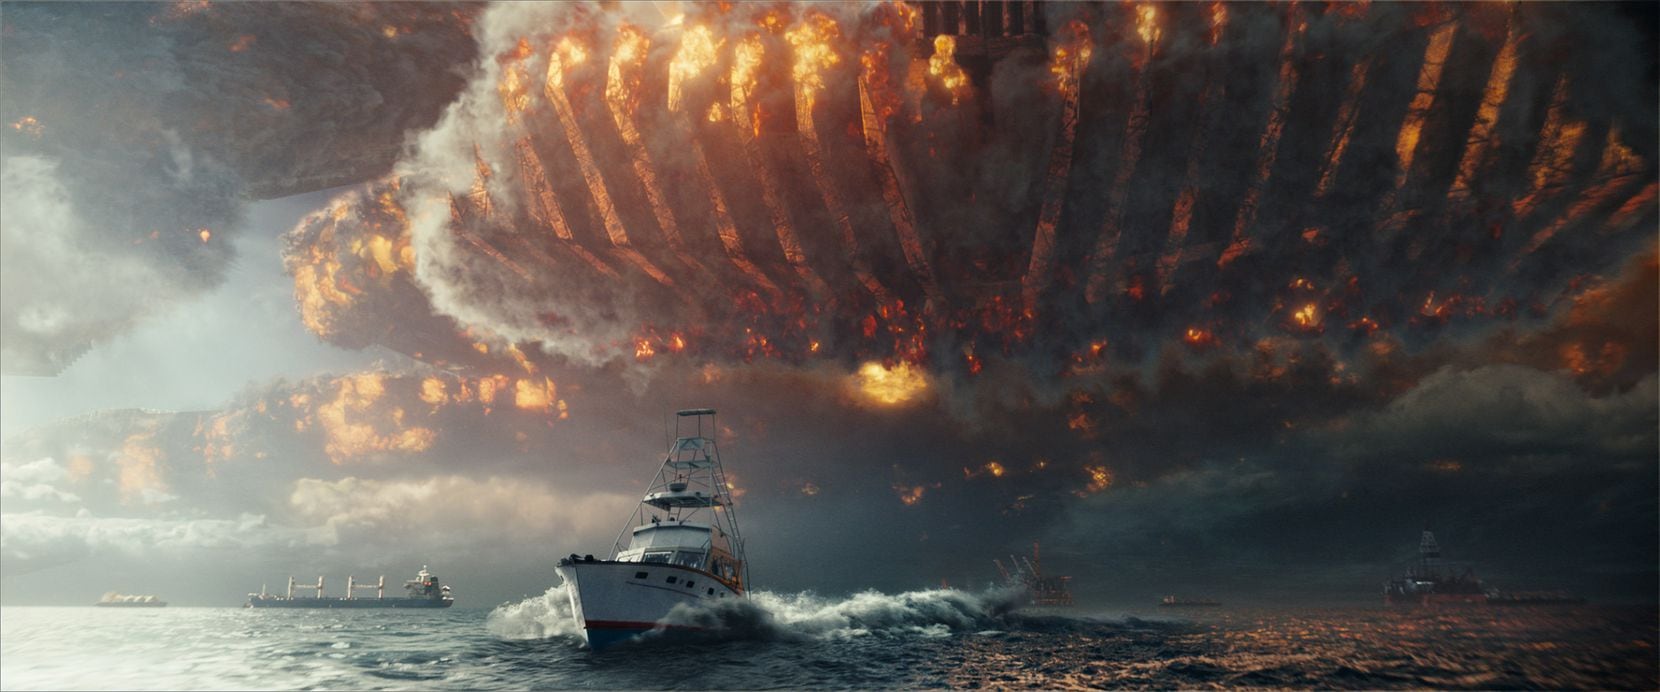 pelicula independence day resurgence download